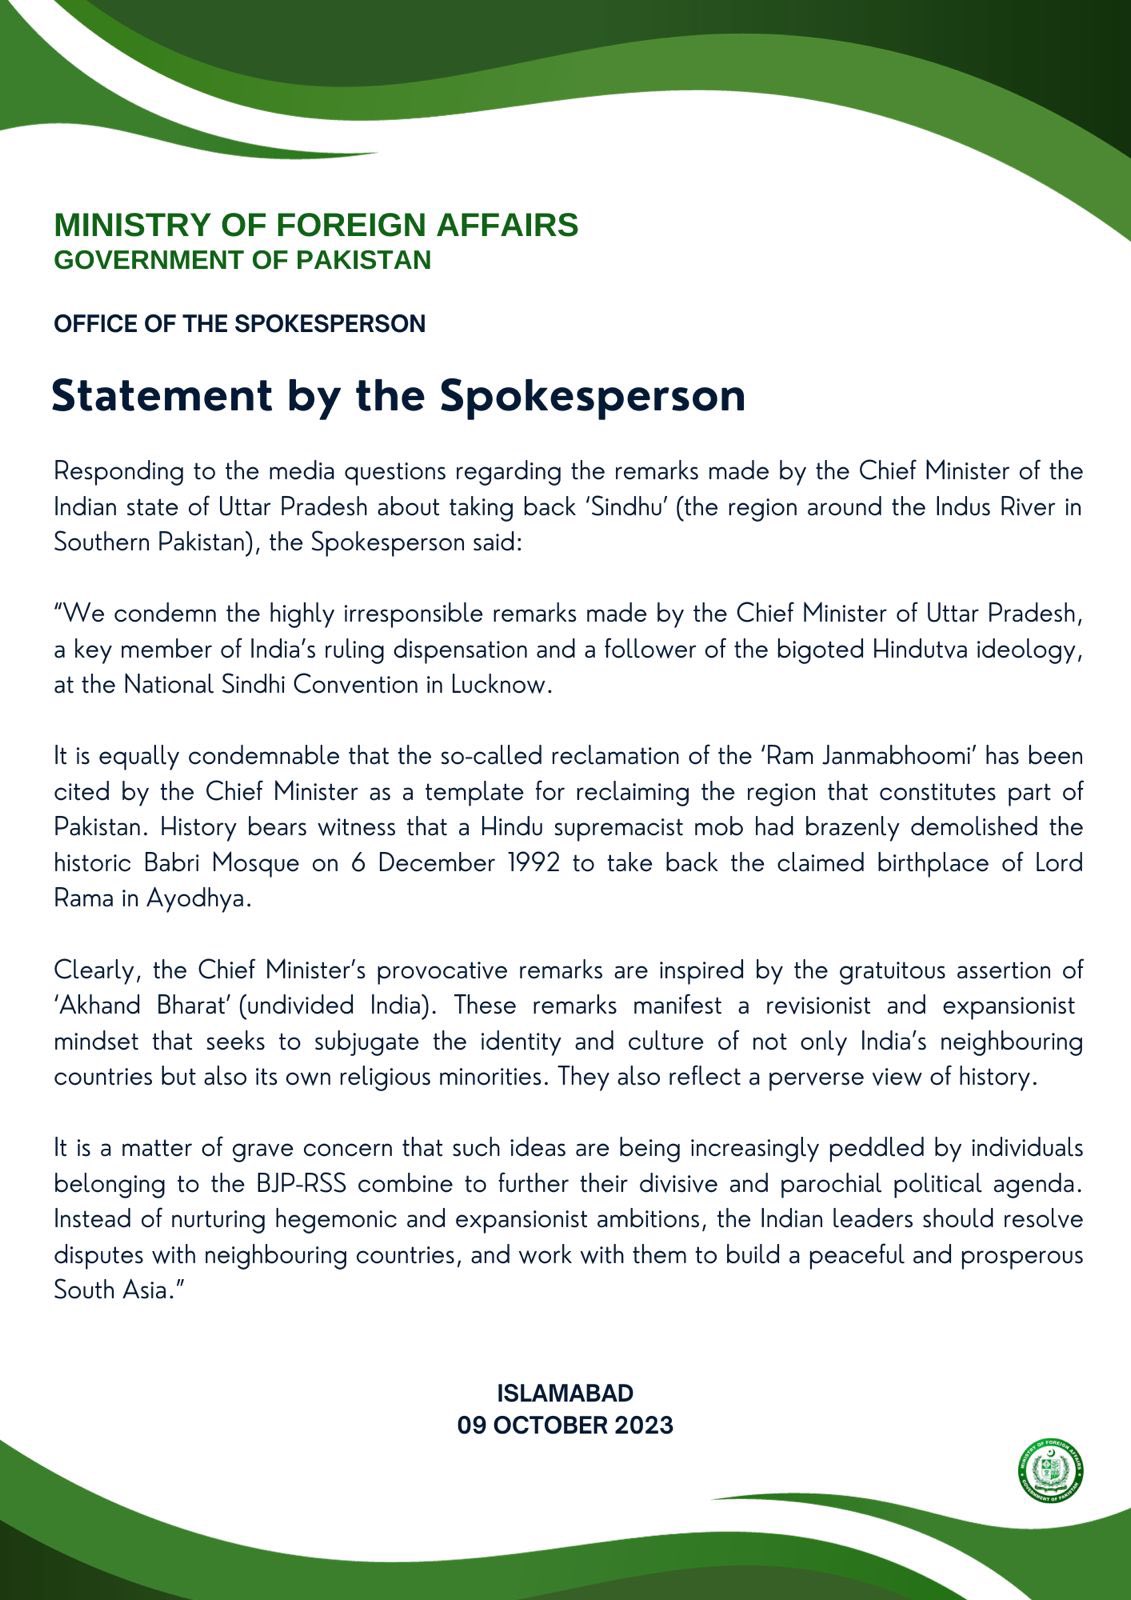 Pakistan condemns Indian chief minister's 'irresponsible' remarks